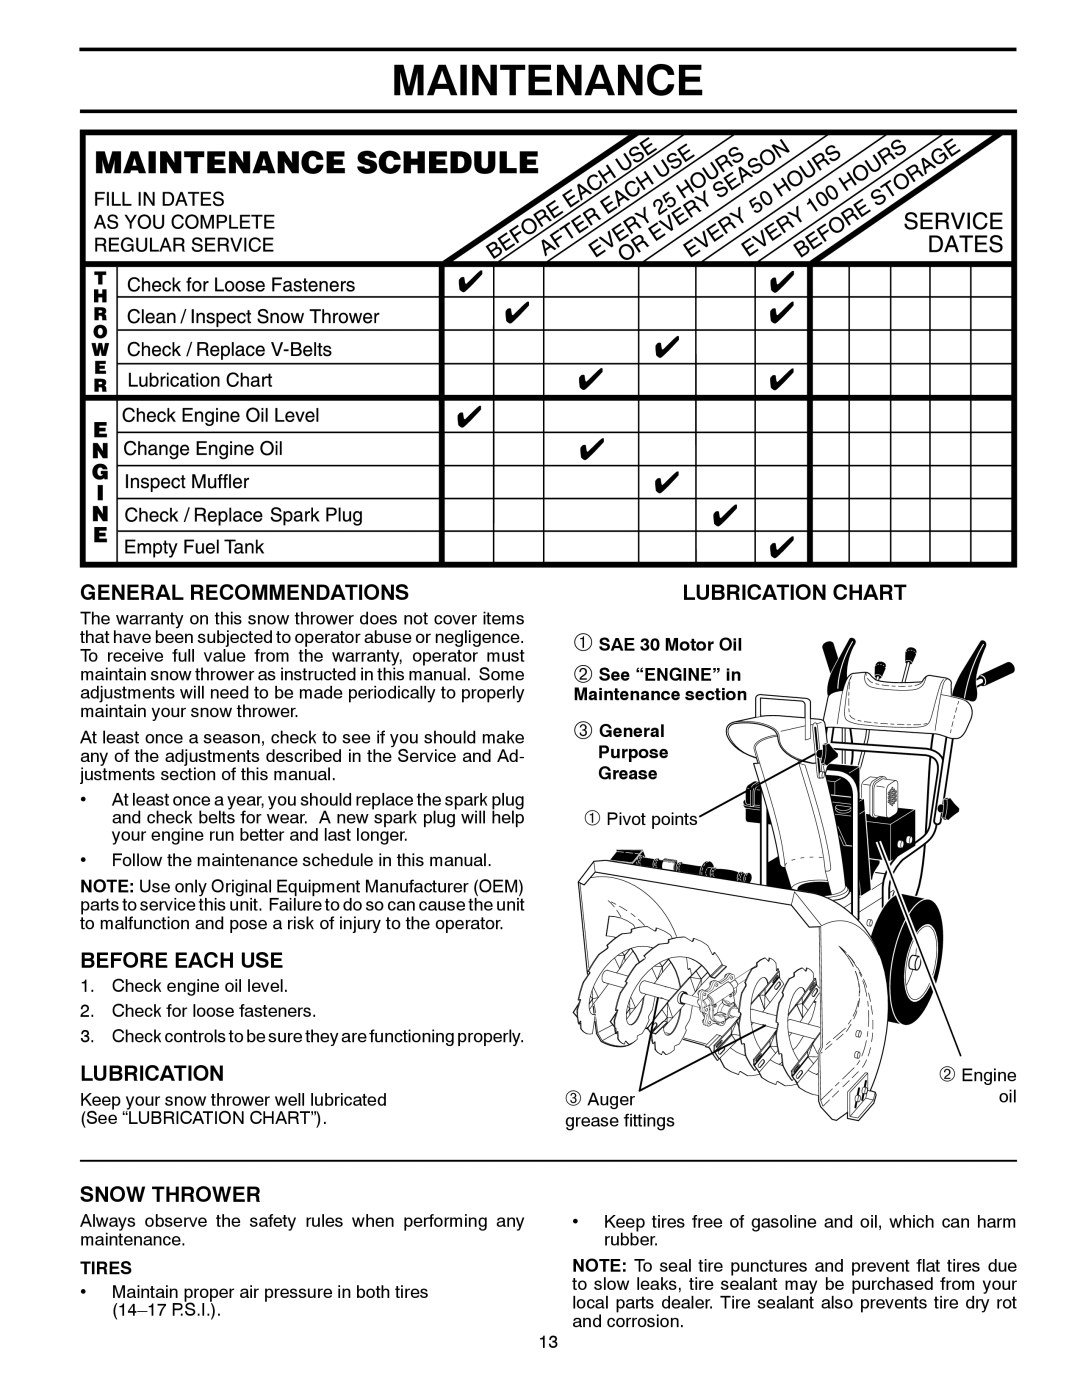 Poulan 96192002801, 430005 Maintenance, General Recommendations, Before Each Use, Snow Thrower, Lubrication Chart 